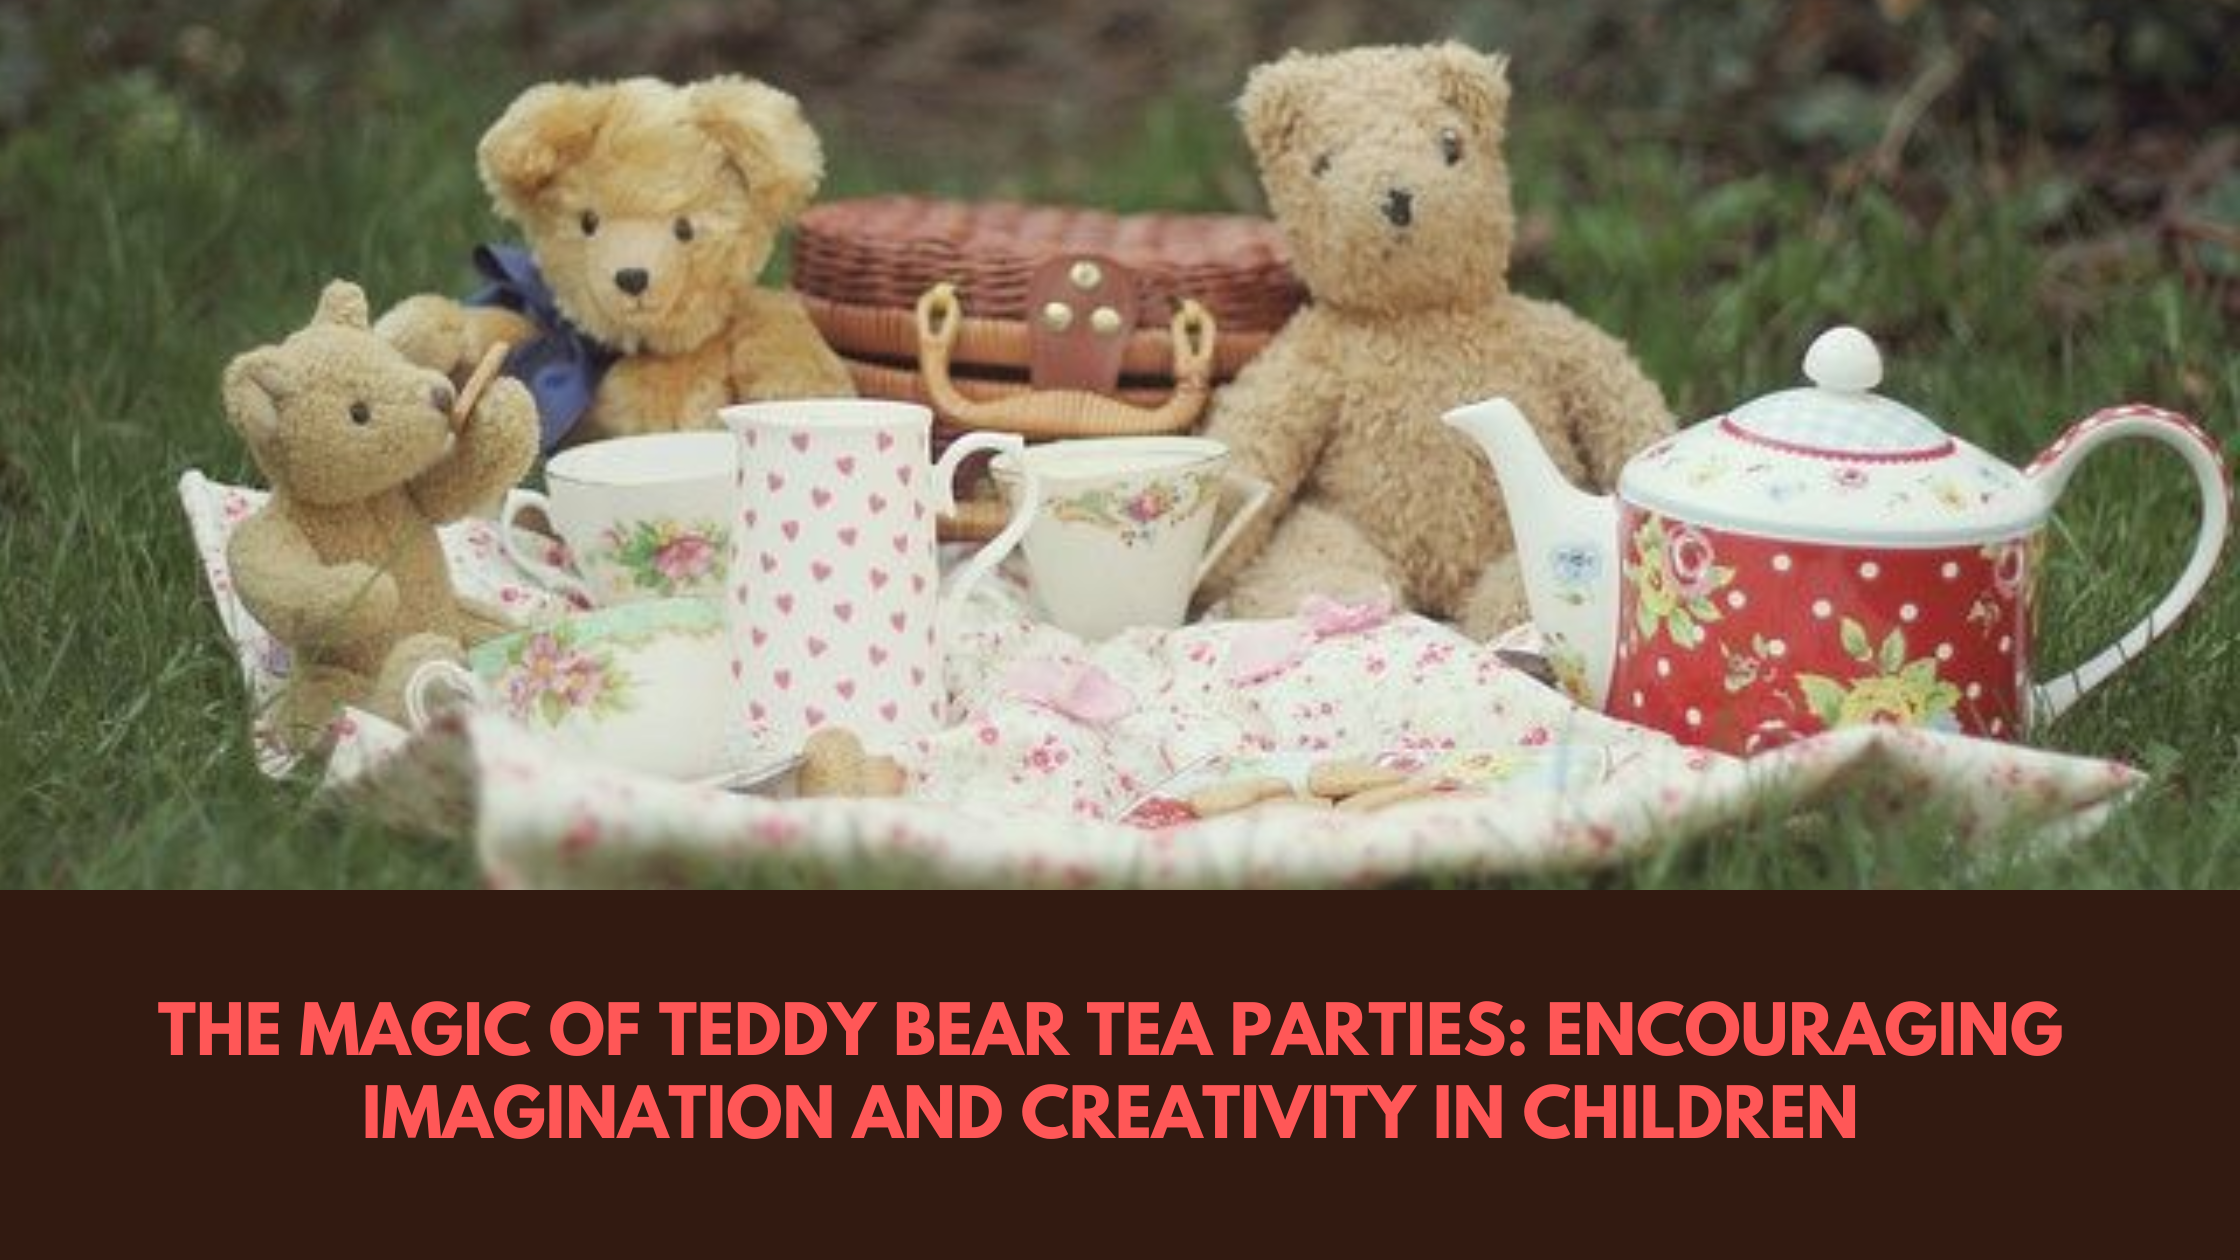 The Magic of Teddy Bear Tea Parties: Encouraging Imagination and Creativity in Children